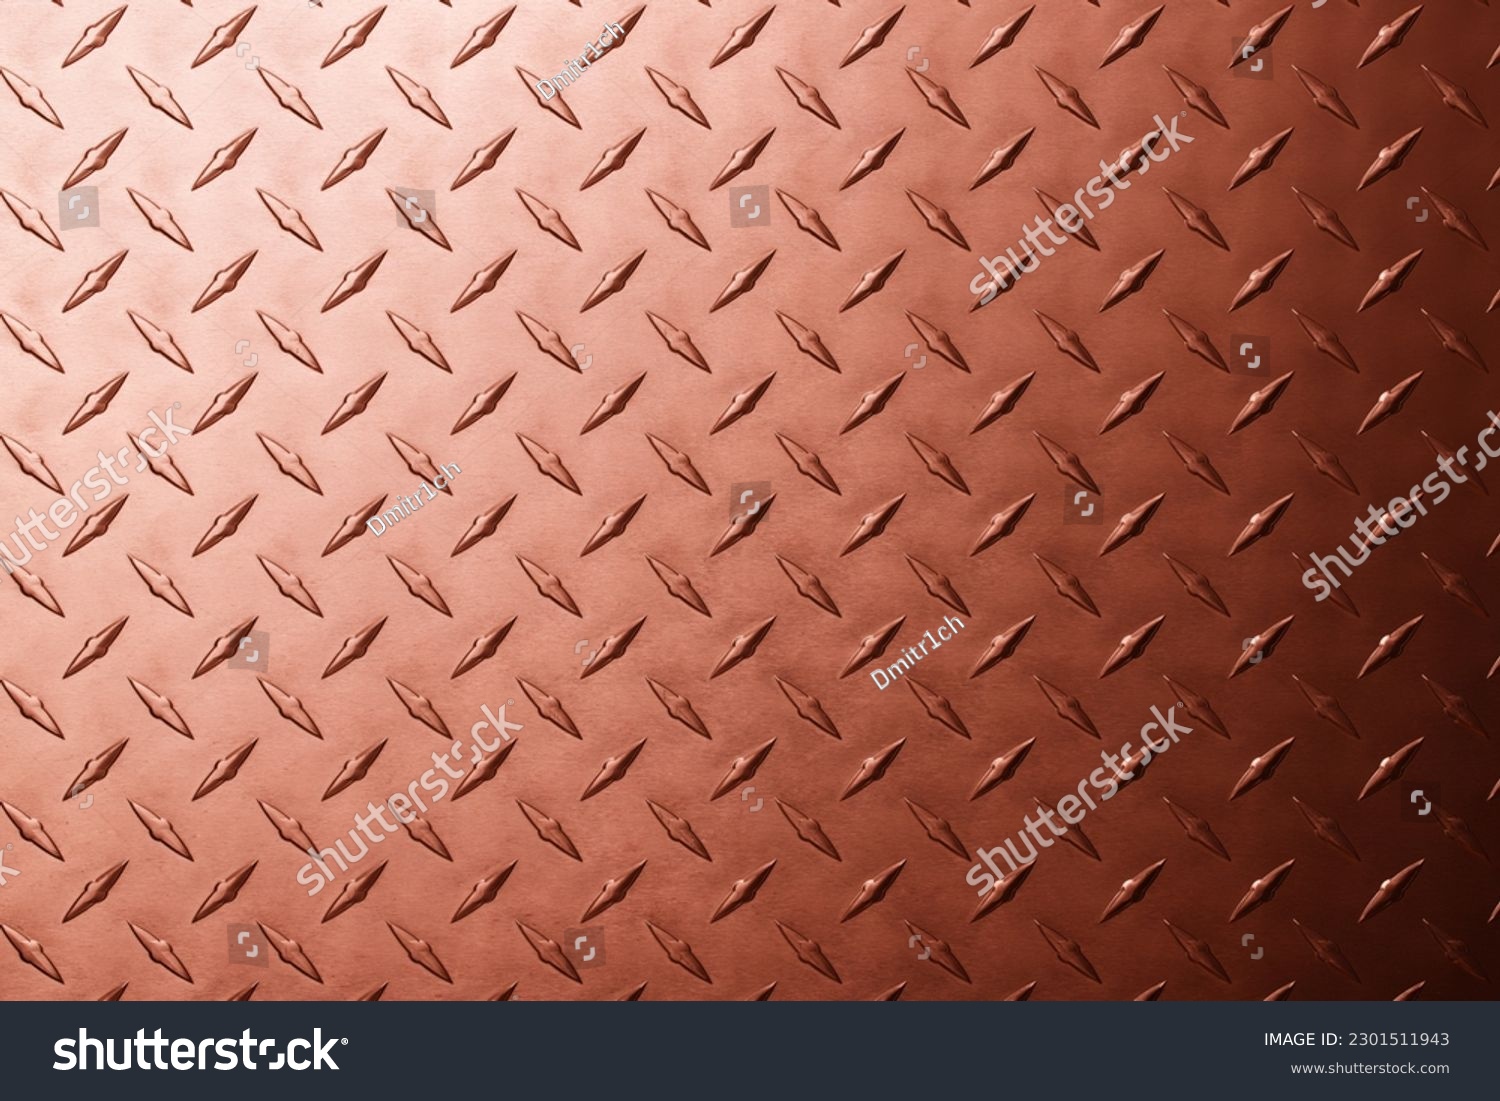 Abstract background of copper texture with a diamond pattern. #2301511943